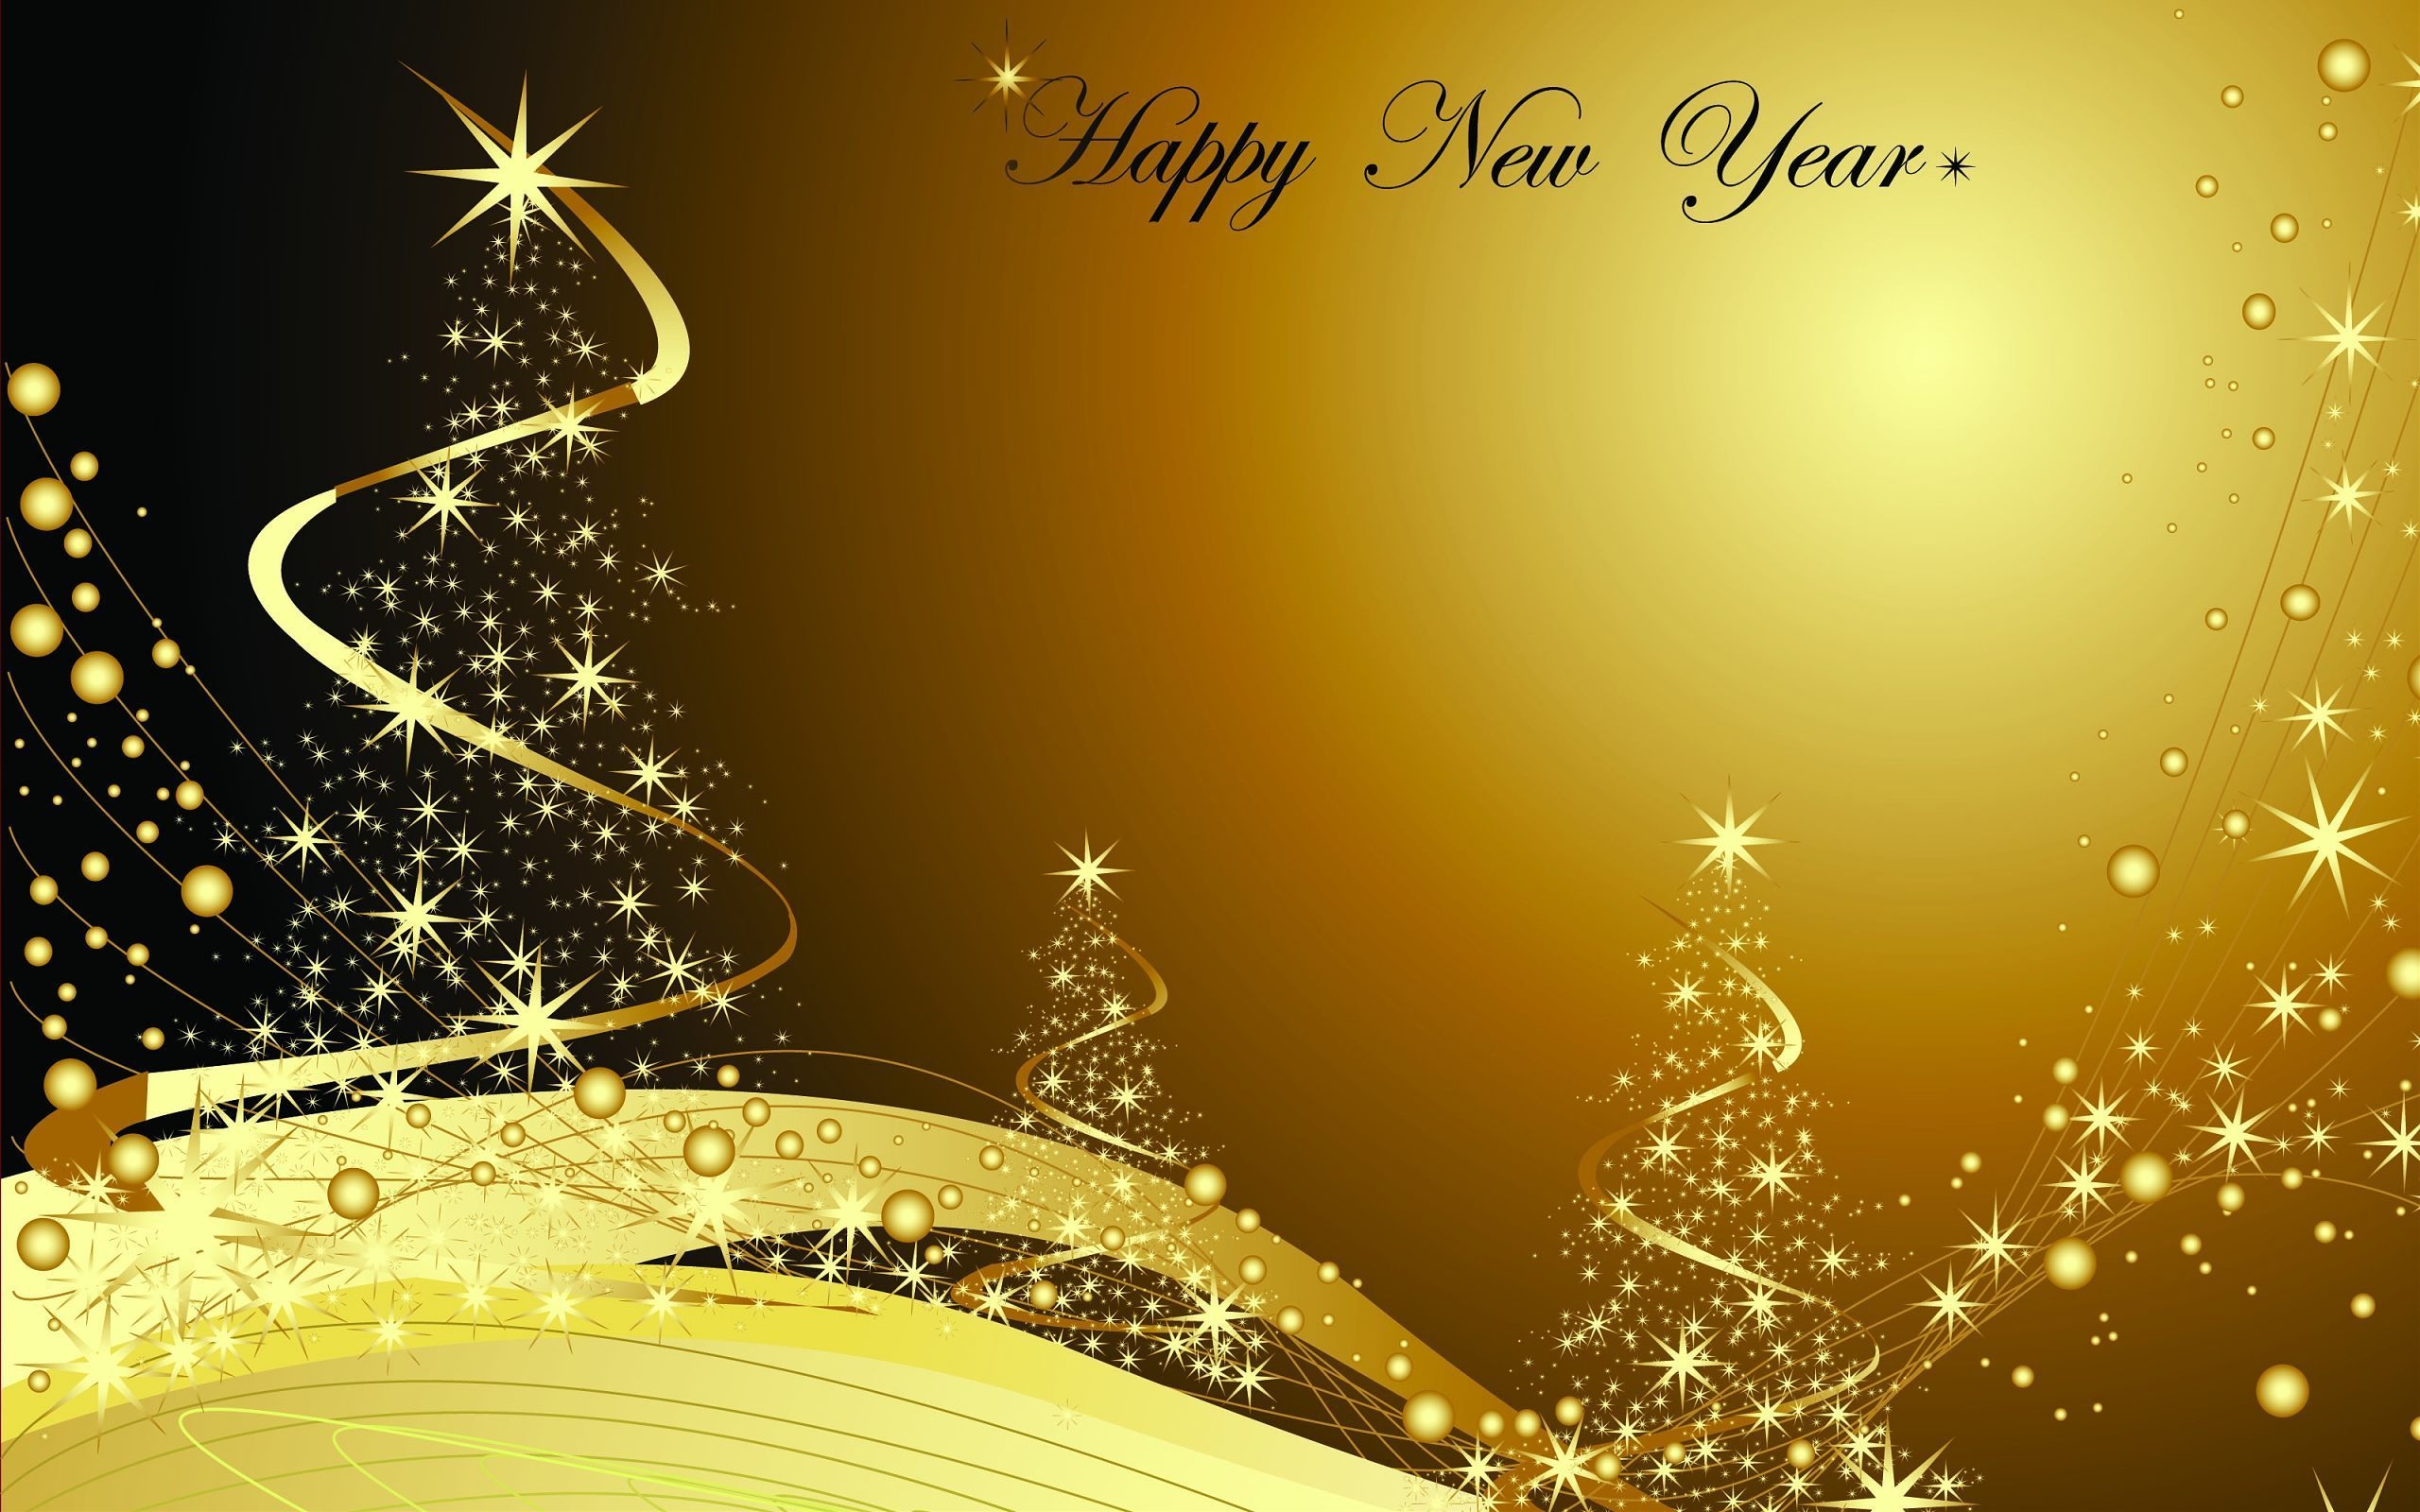 Happy New Year Wishes Hd Latest Cute Wallpaper